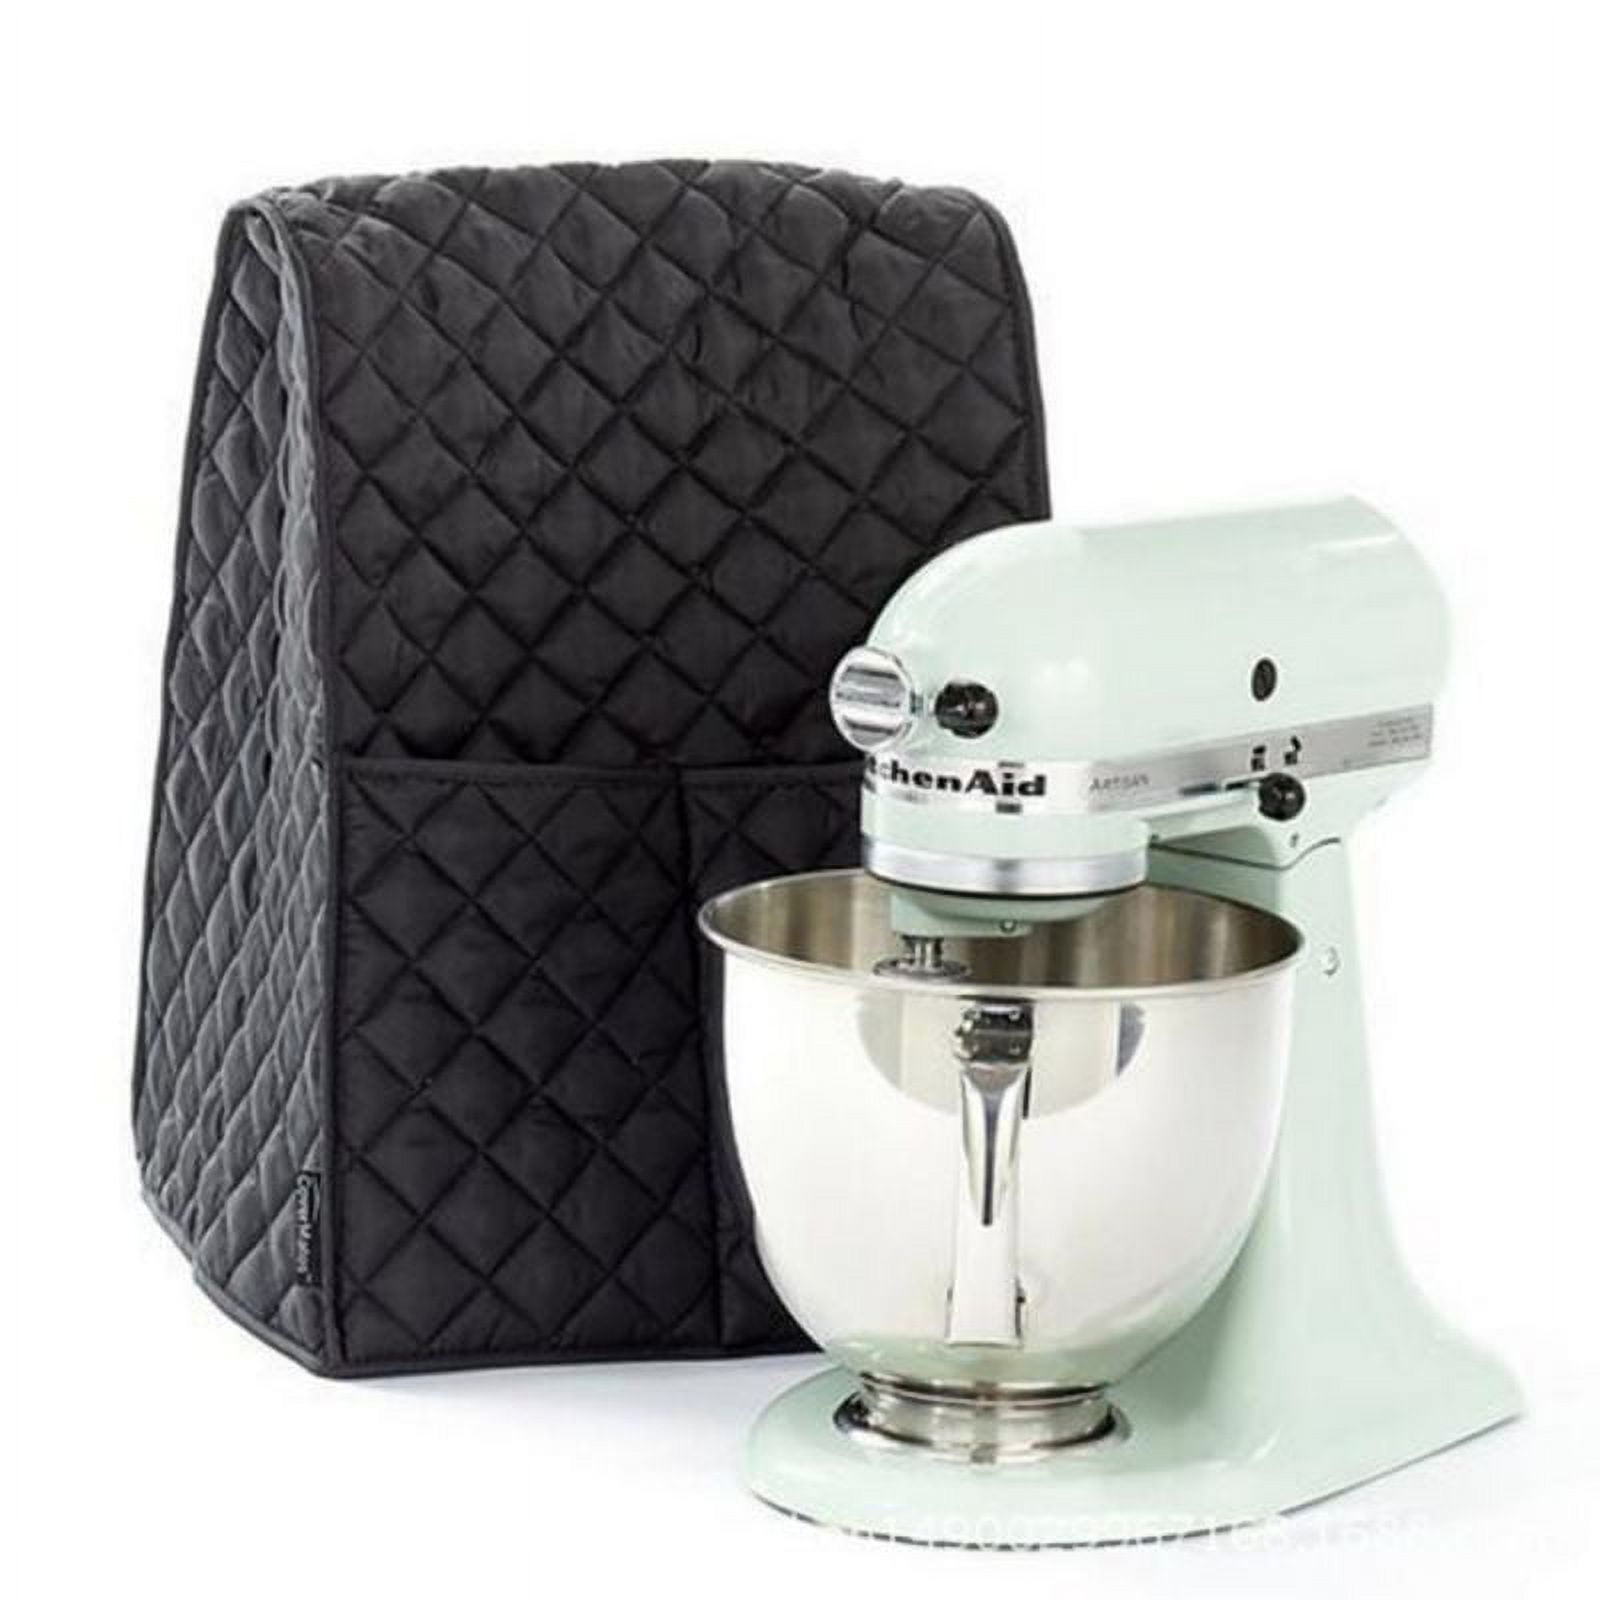 Stand Mixer Cover Compatible with KitchenAid Stand Mixer 4.5-5 Quart,  Portable Travel Storage Case Bag with Multiple Pockets and Handle for  Kitchen